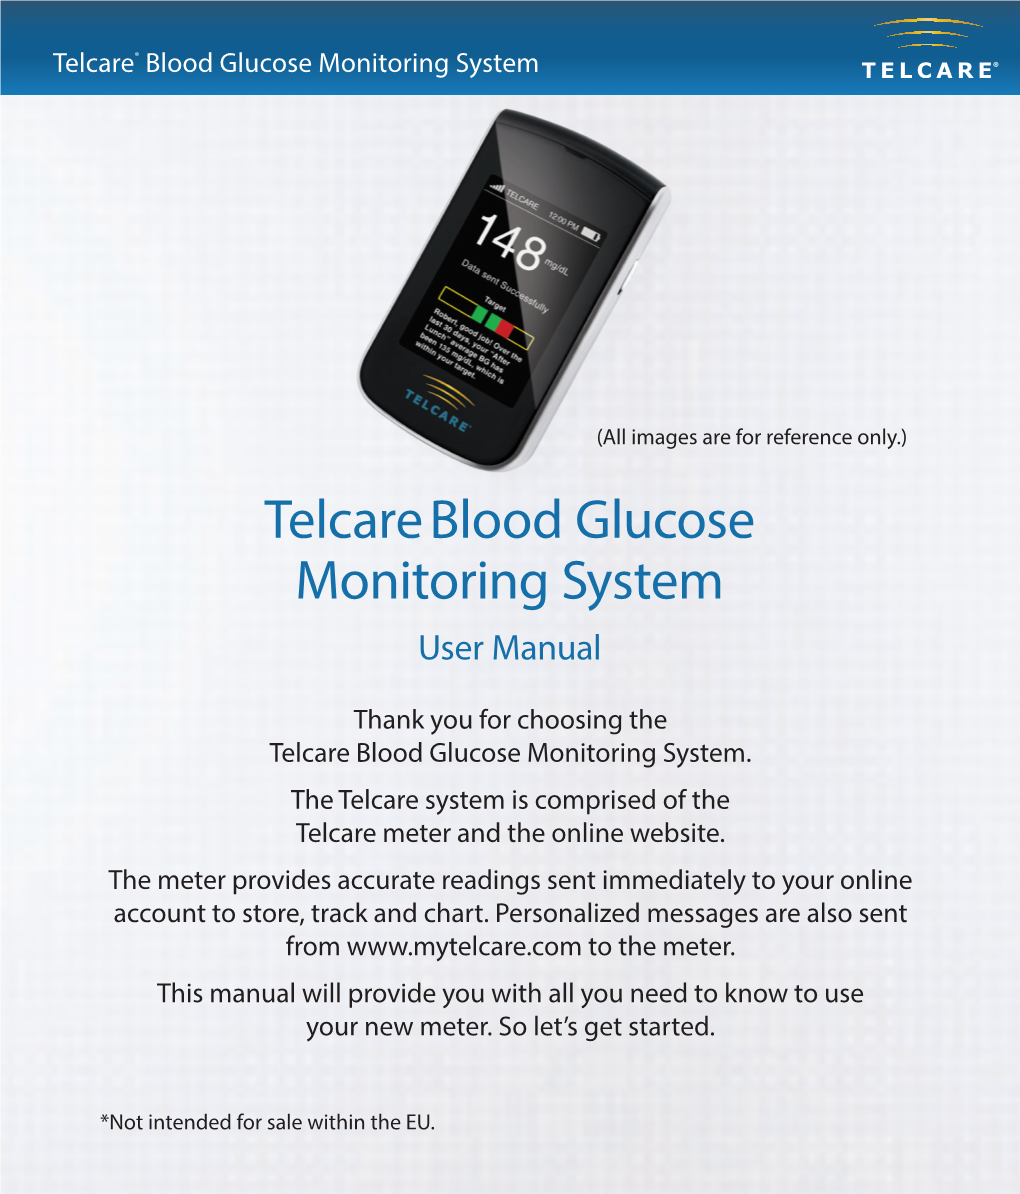 Telcare Blood Glucose Monitoring System ®